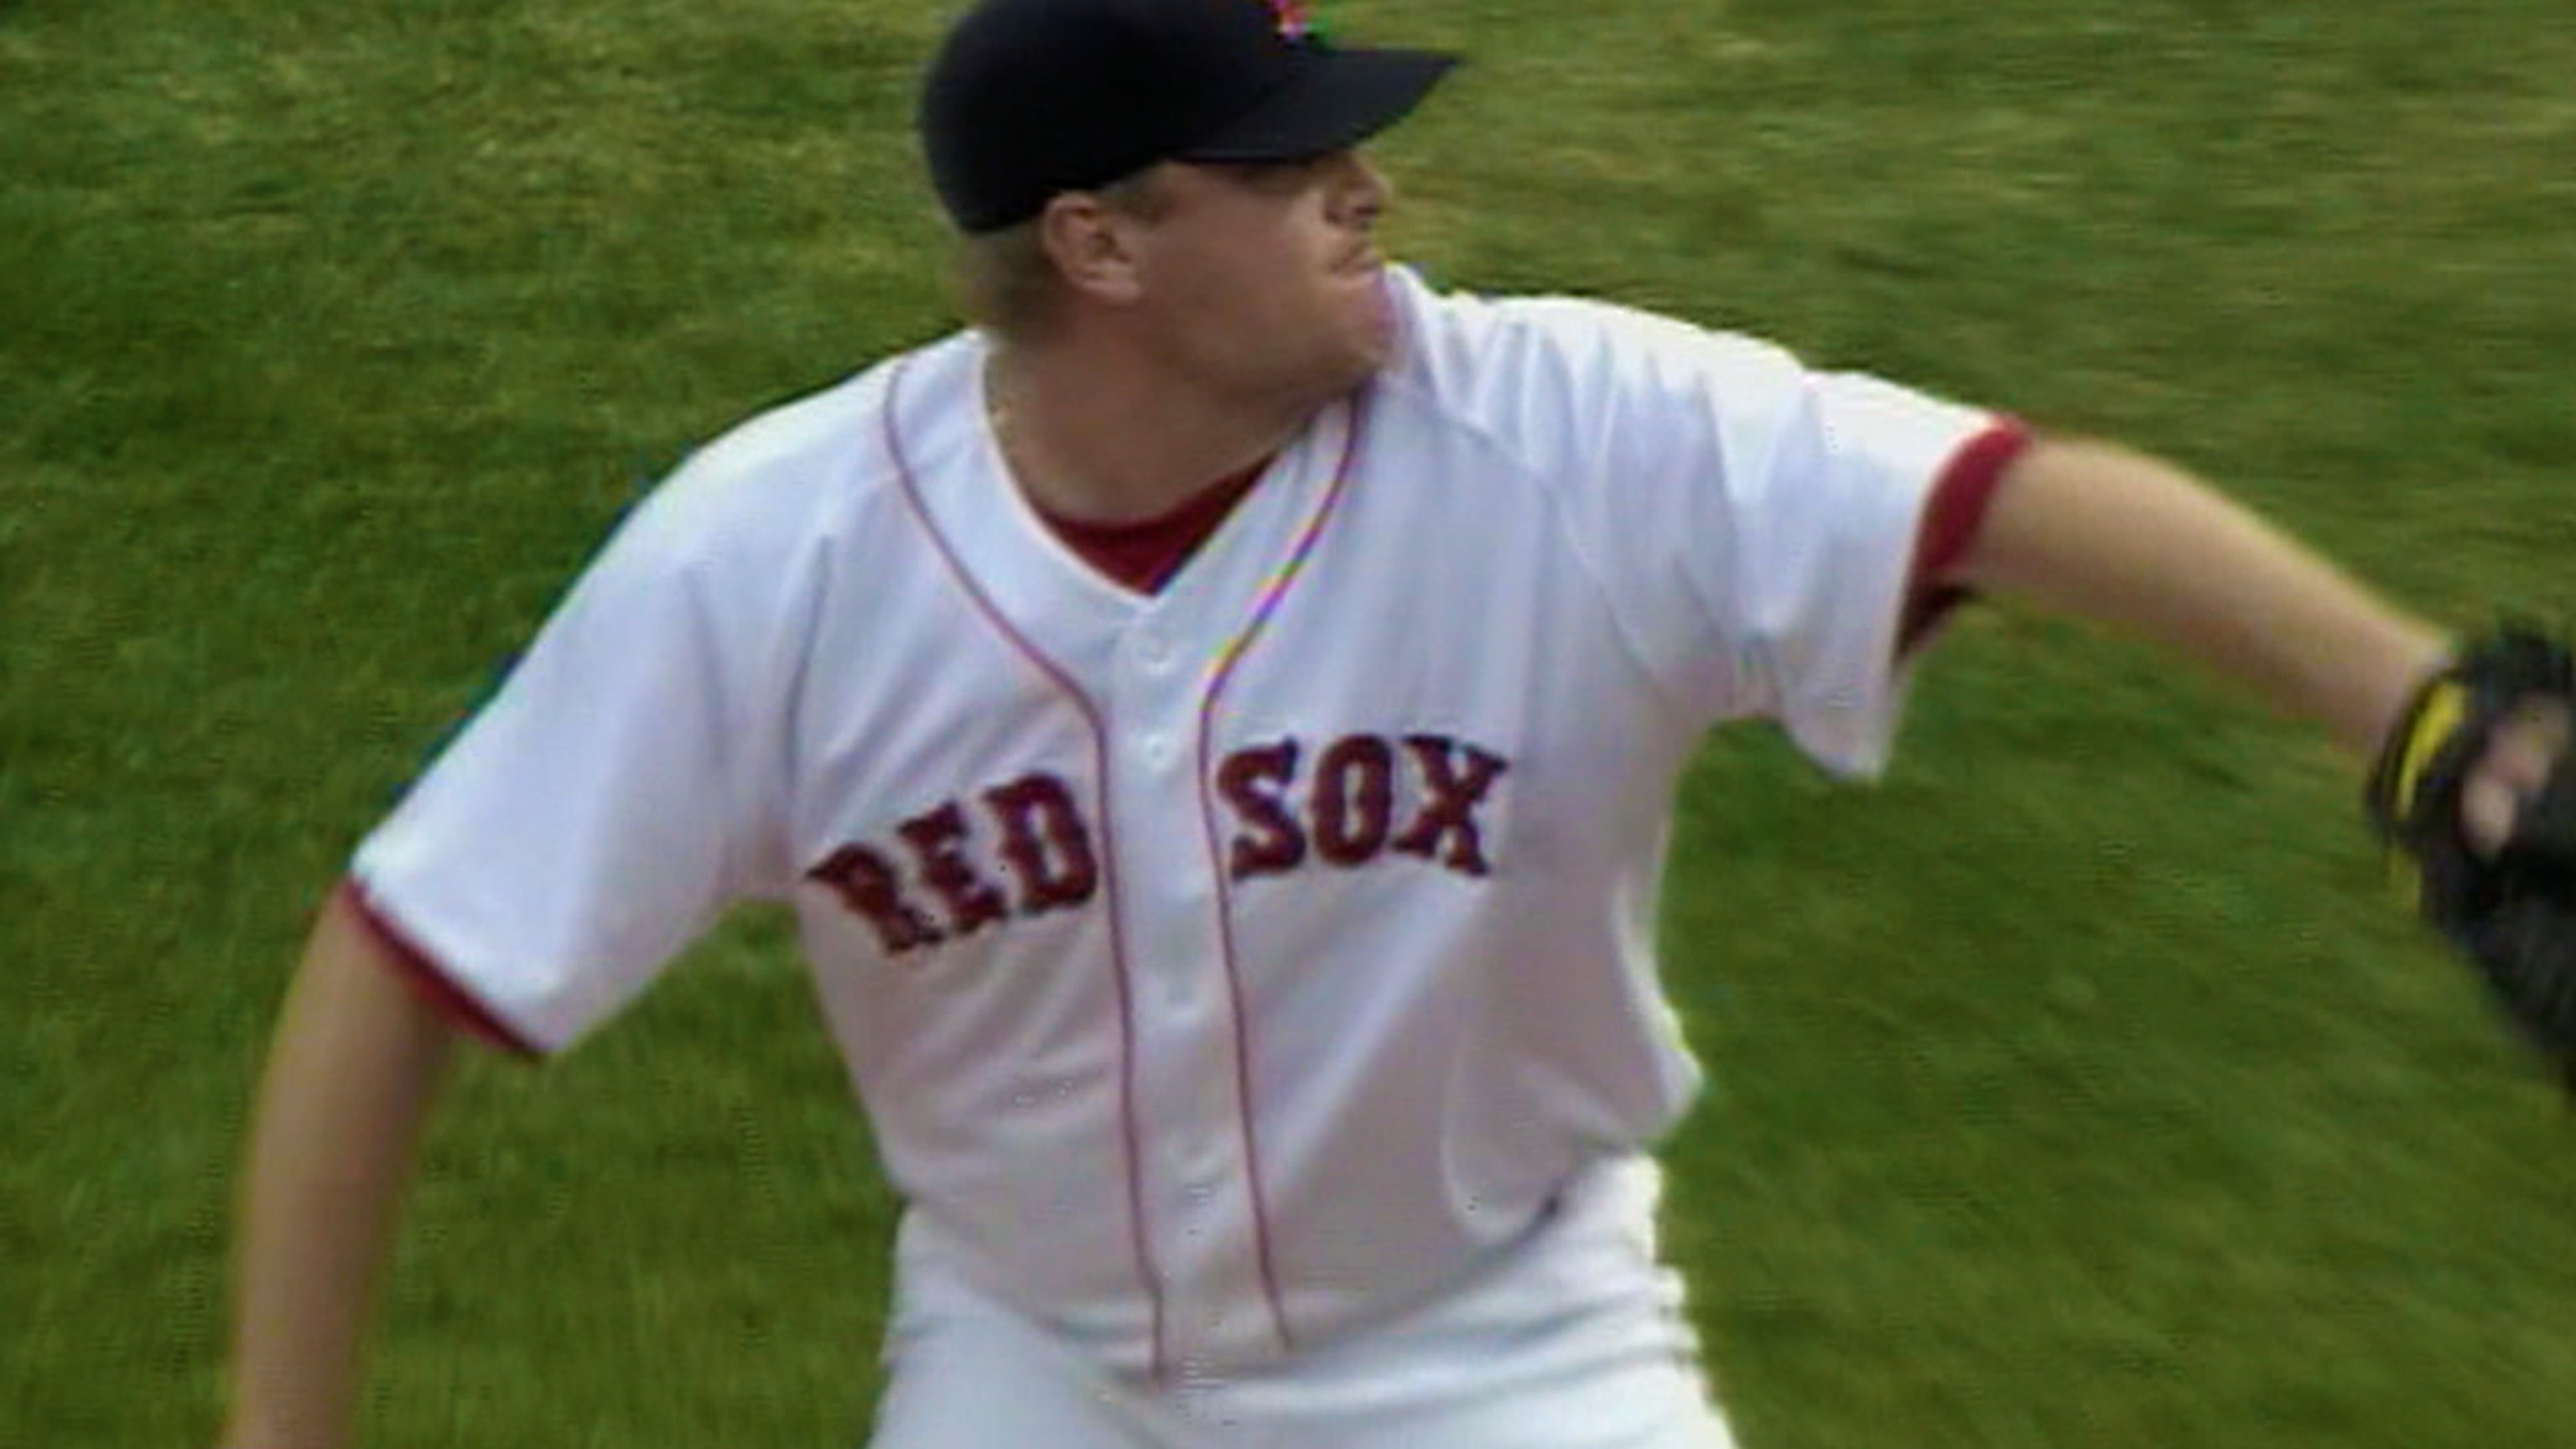 Wife of Red Sox legend lambastes Curt Schilling for revealing ex